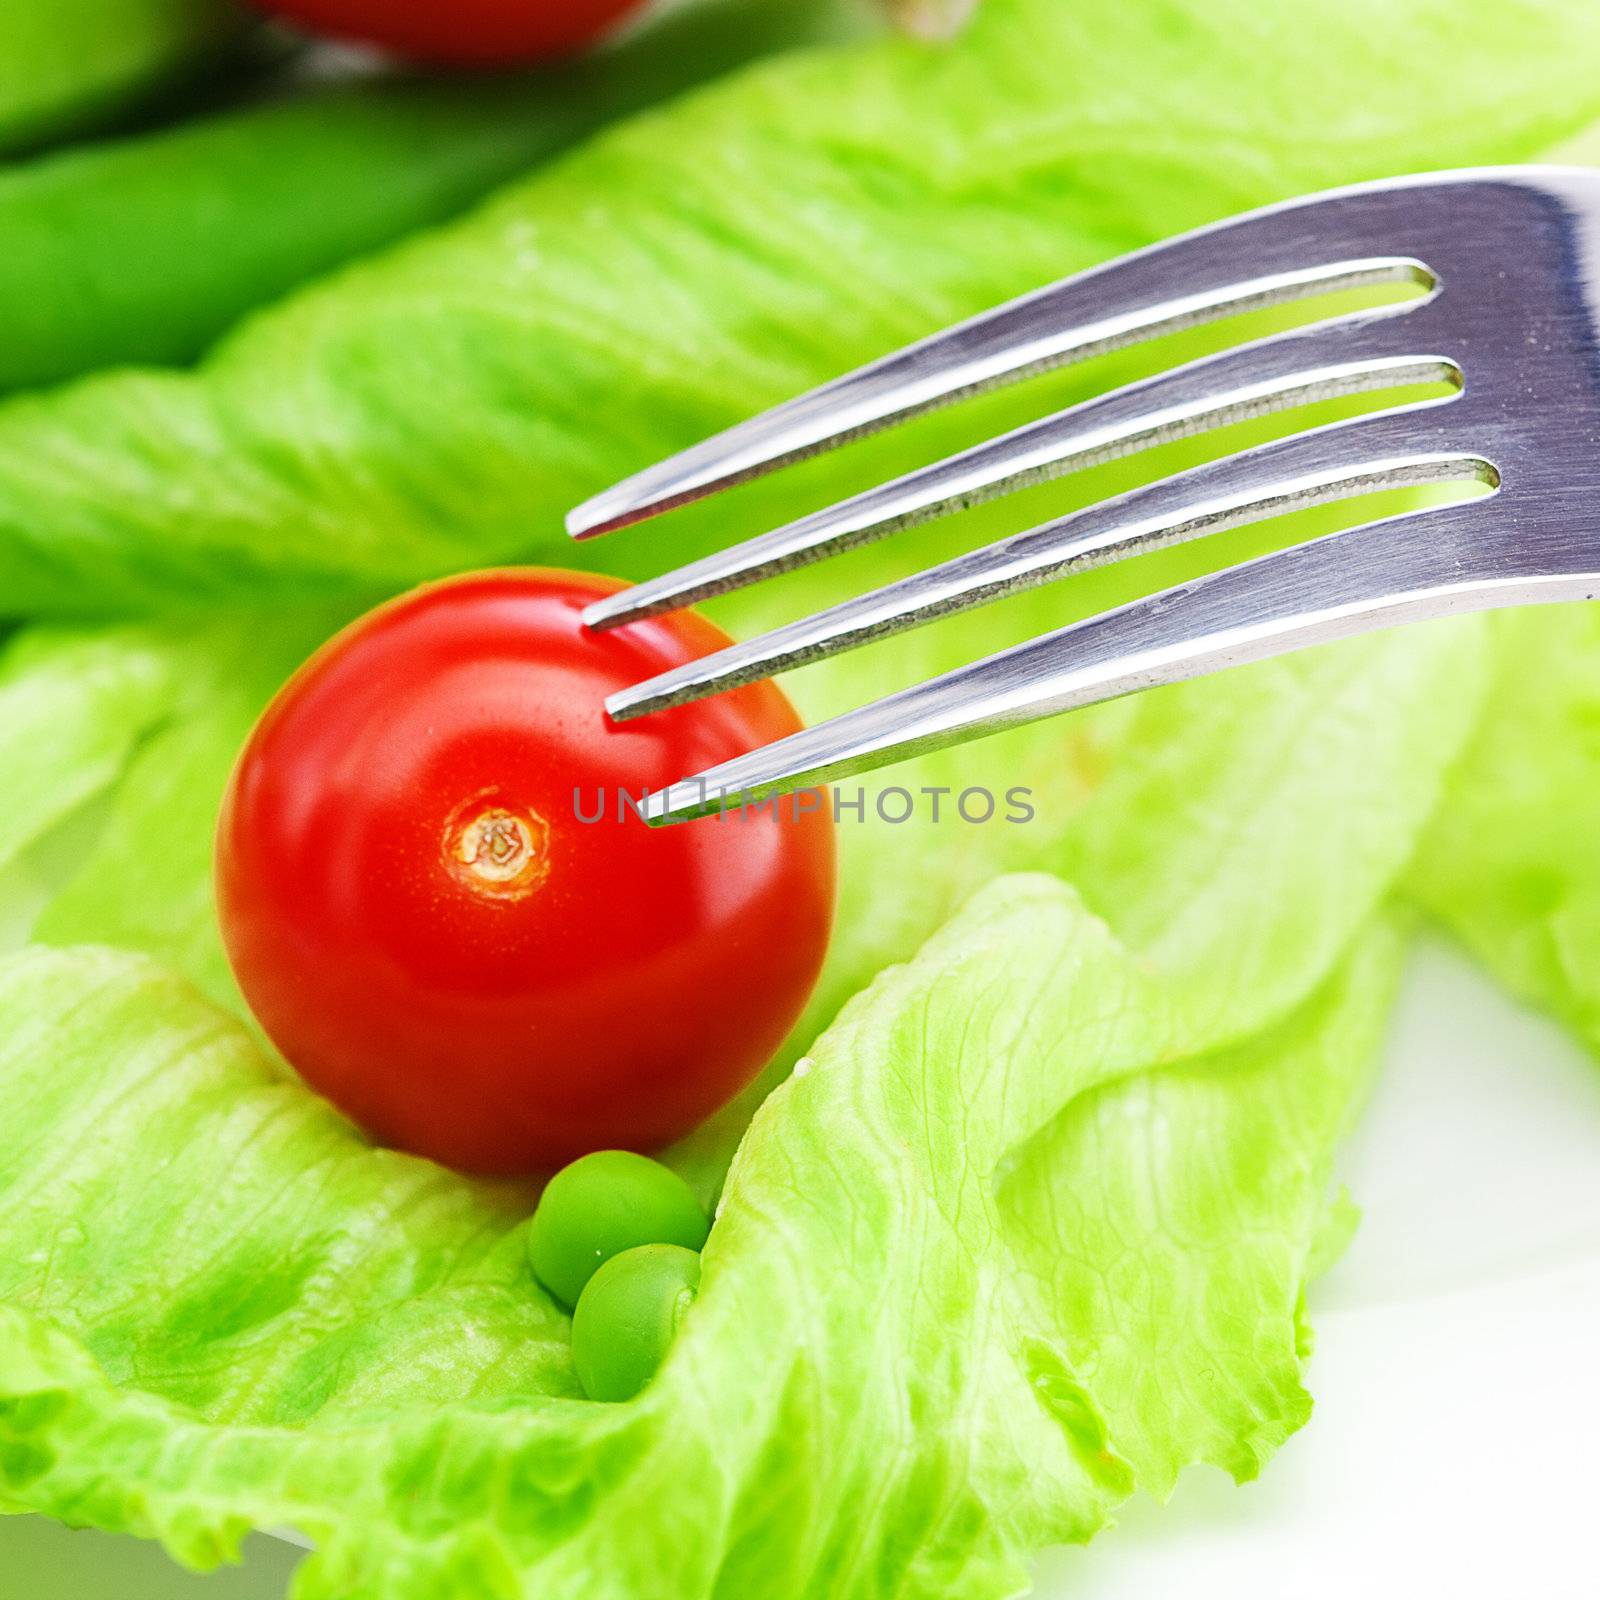 tomato,peas and lettuce with a fork on a plate isolated on white